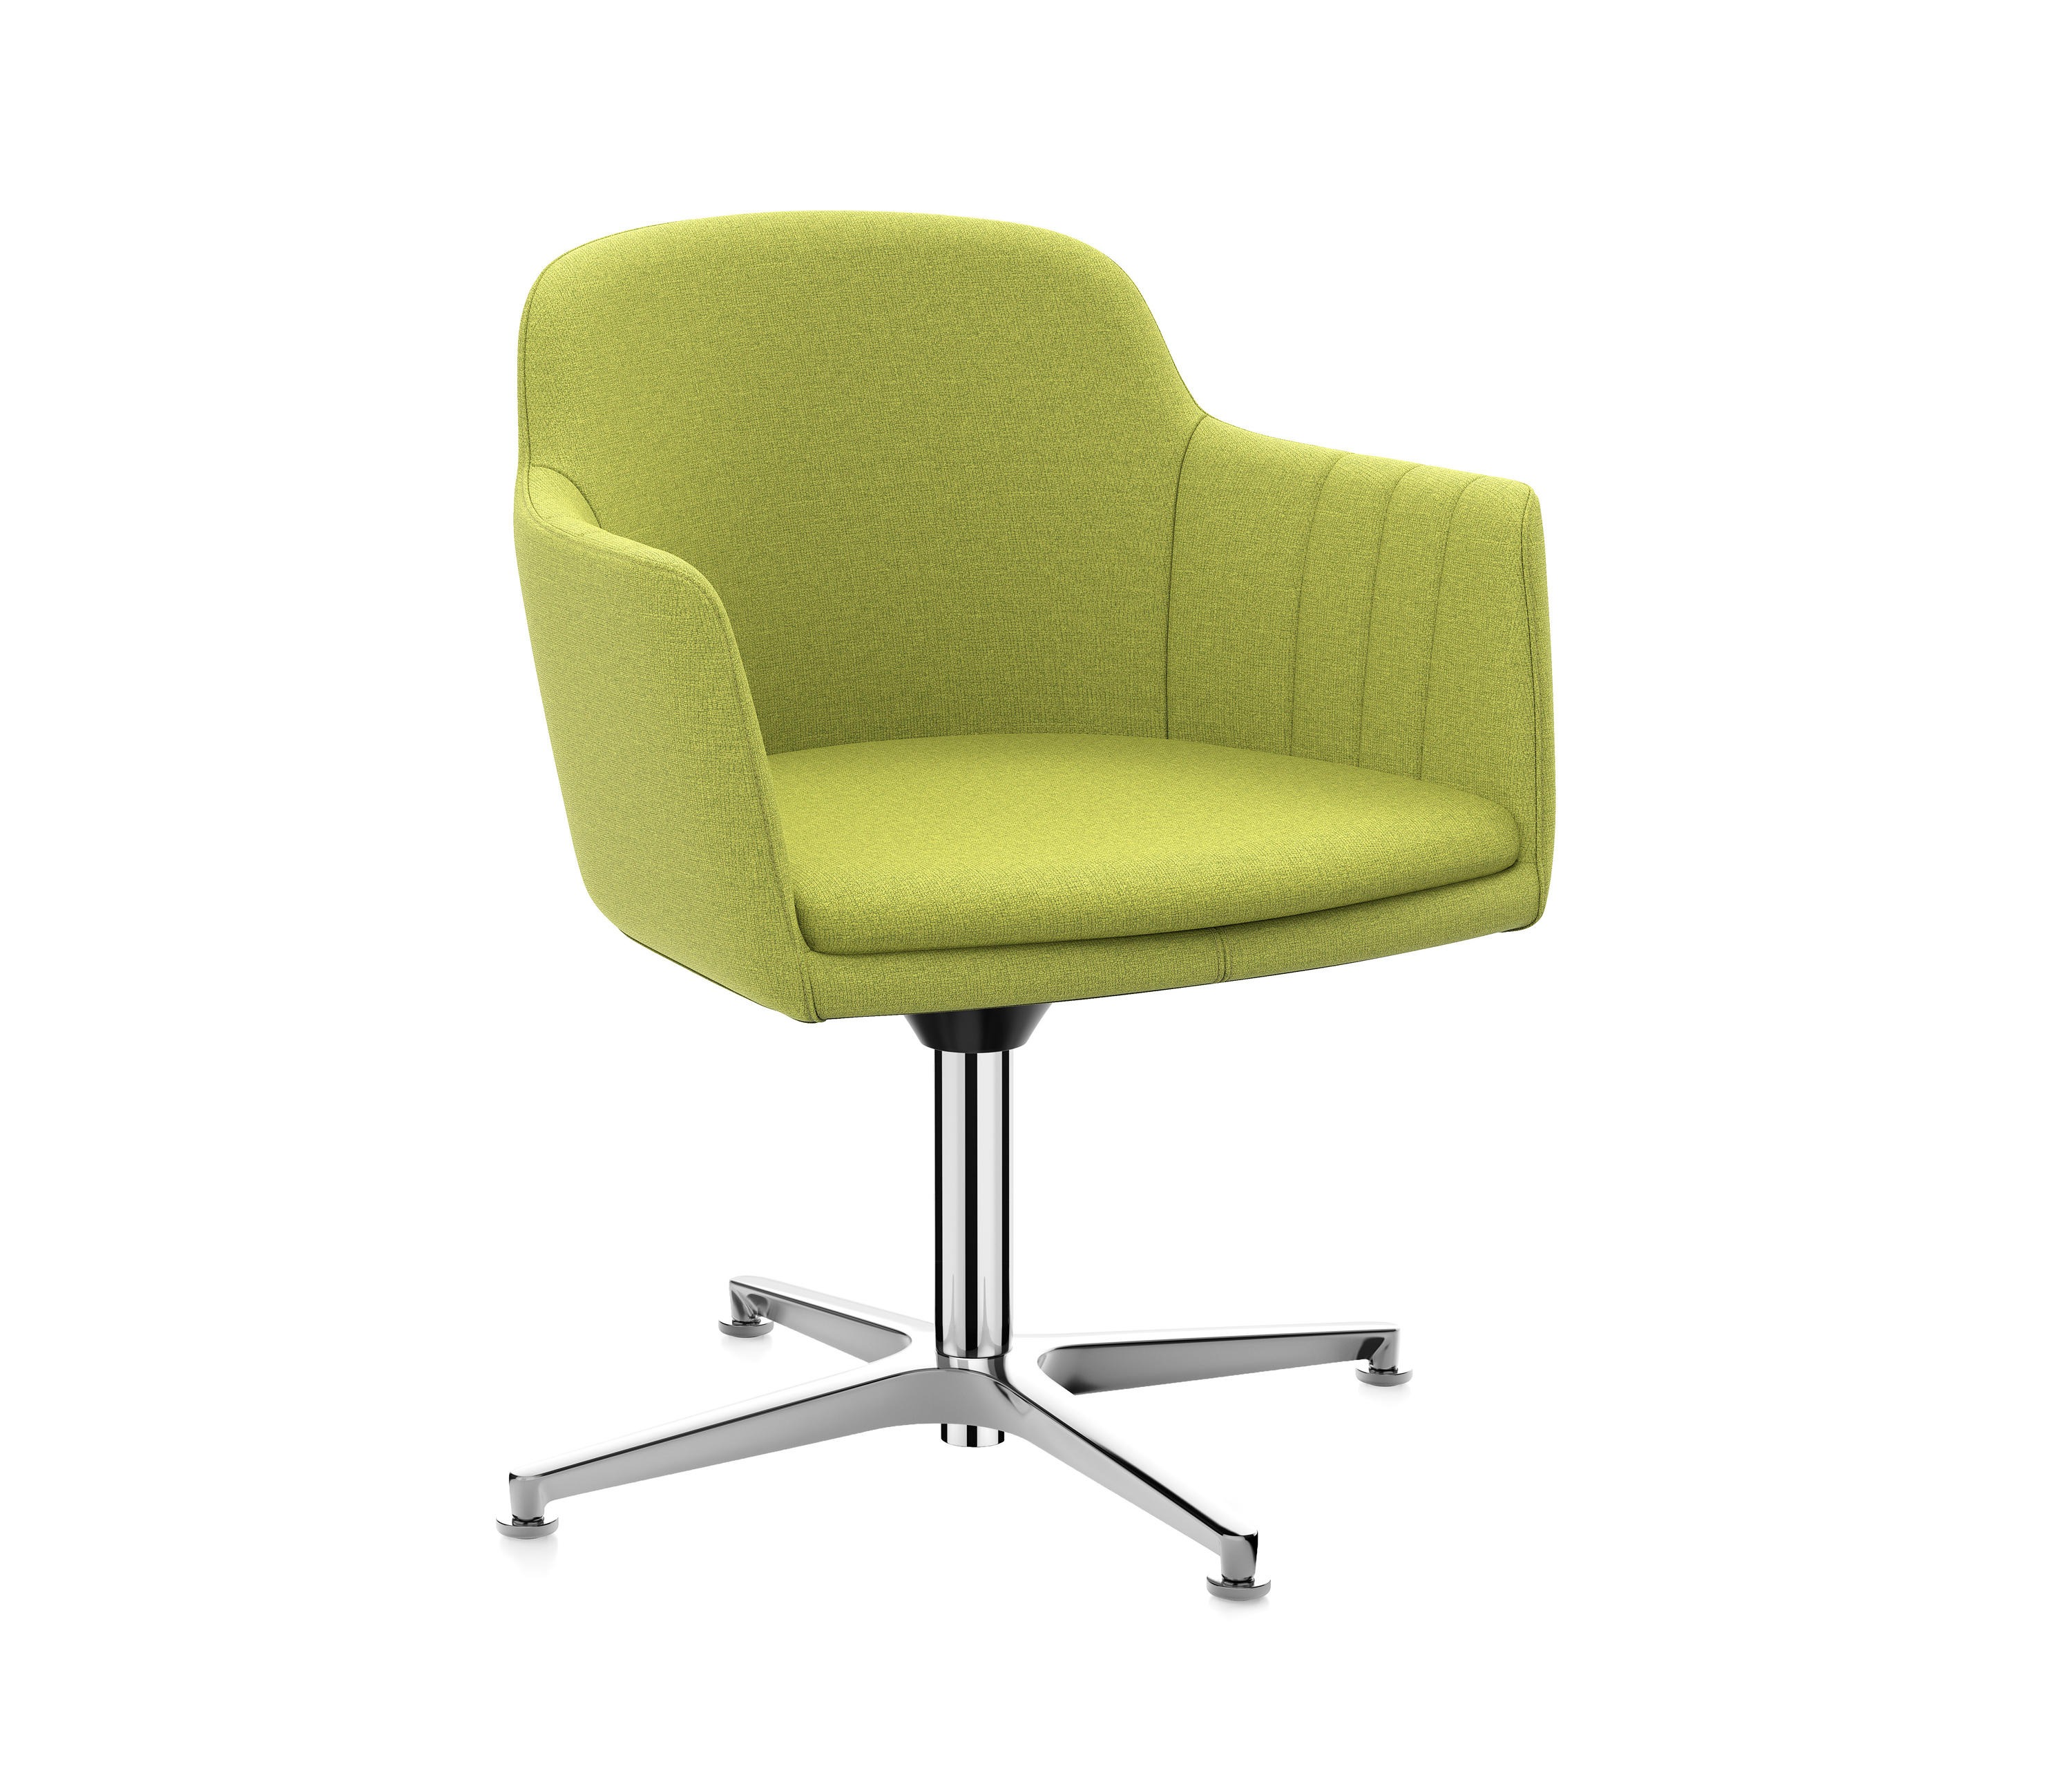 Lemonis5 Lm740 Chairs From Interstuhl Architonic